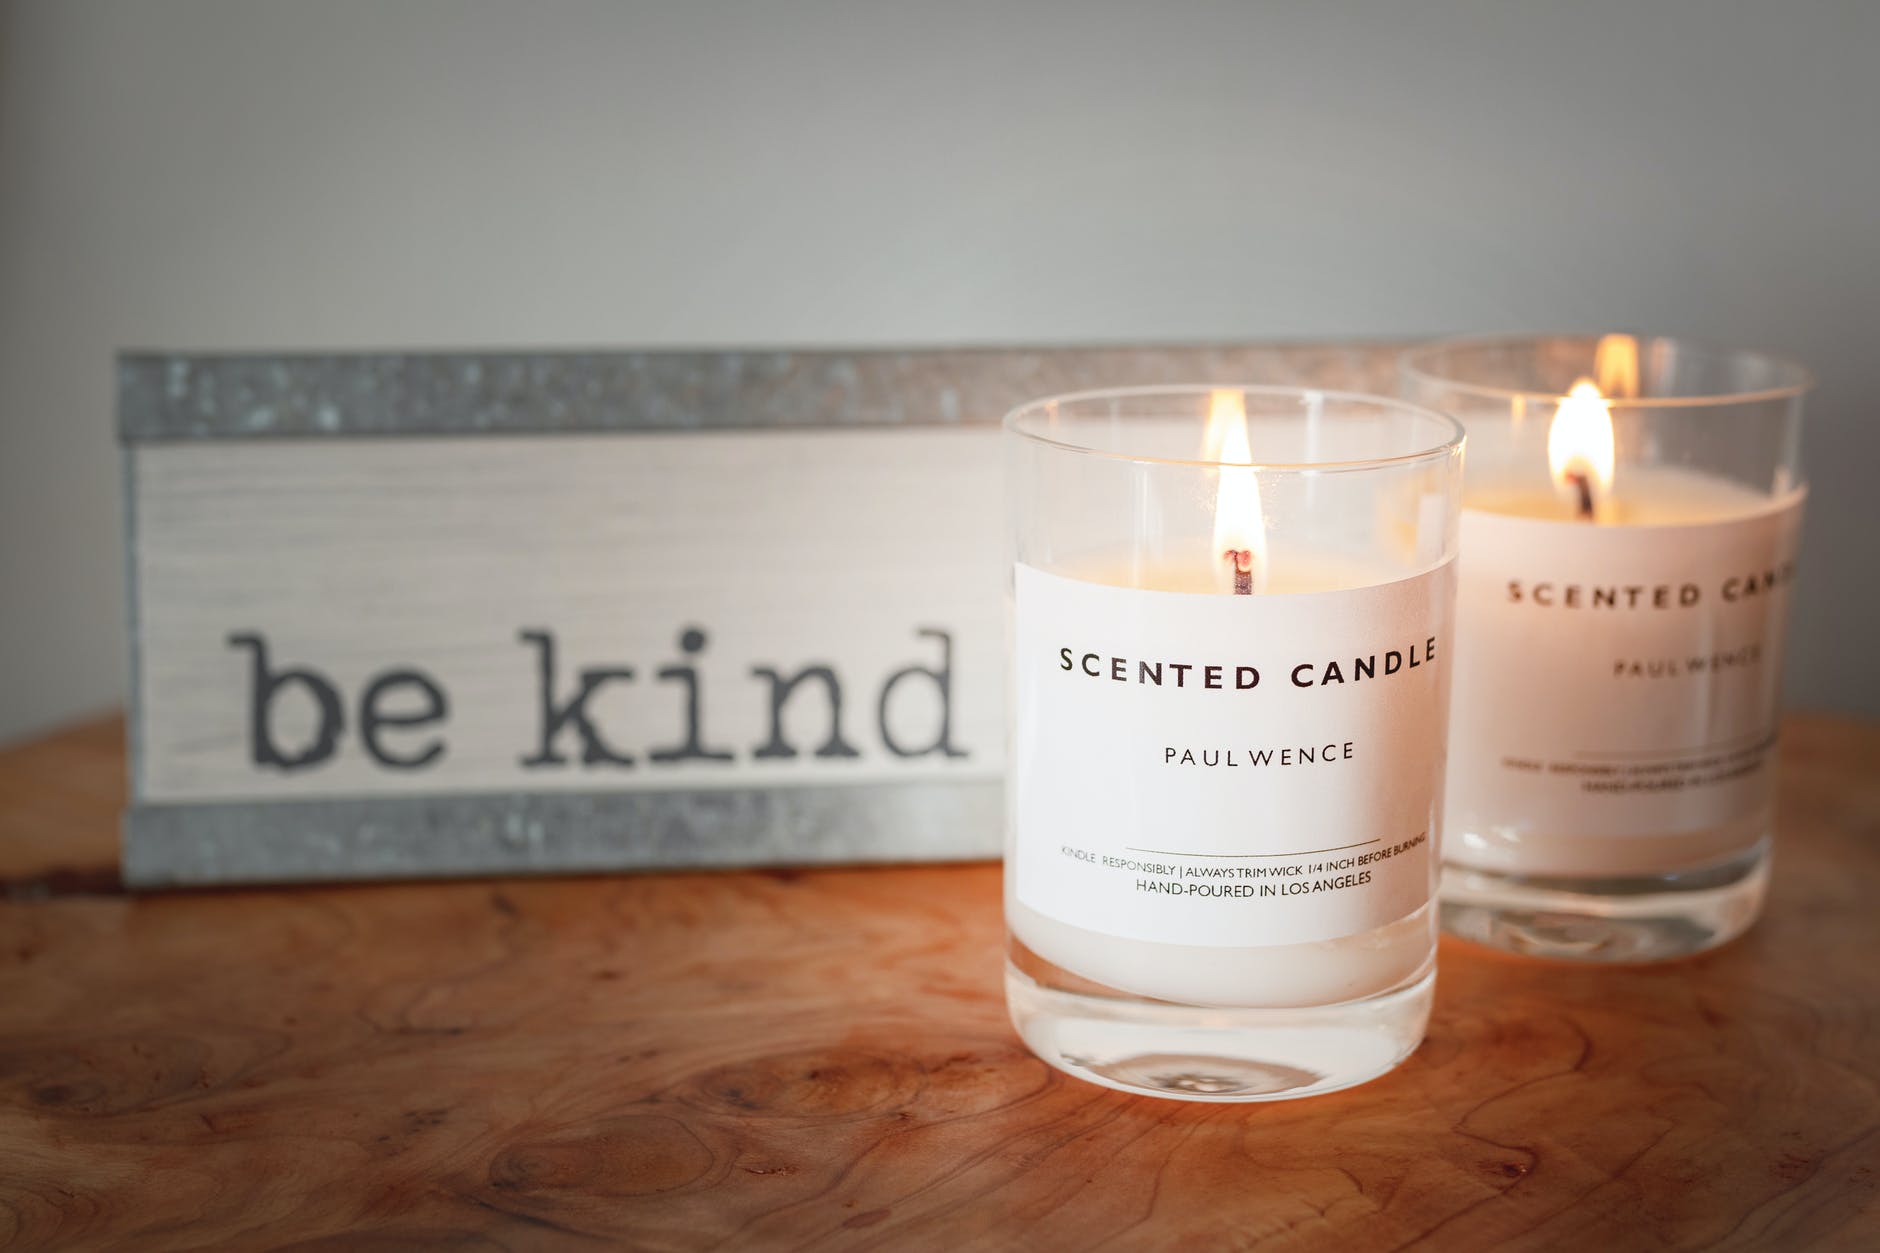 Autumn scents for self care and managing stress includes candles and diffusers